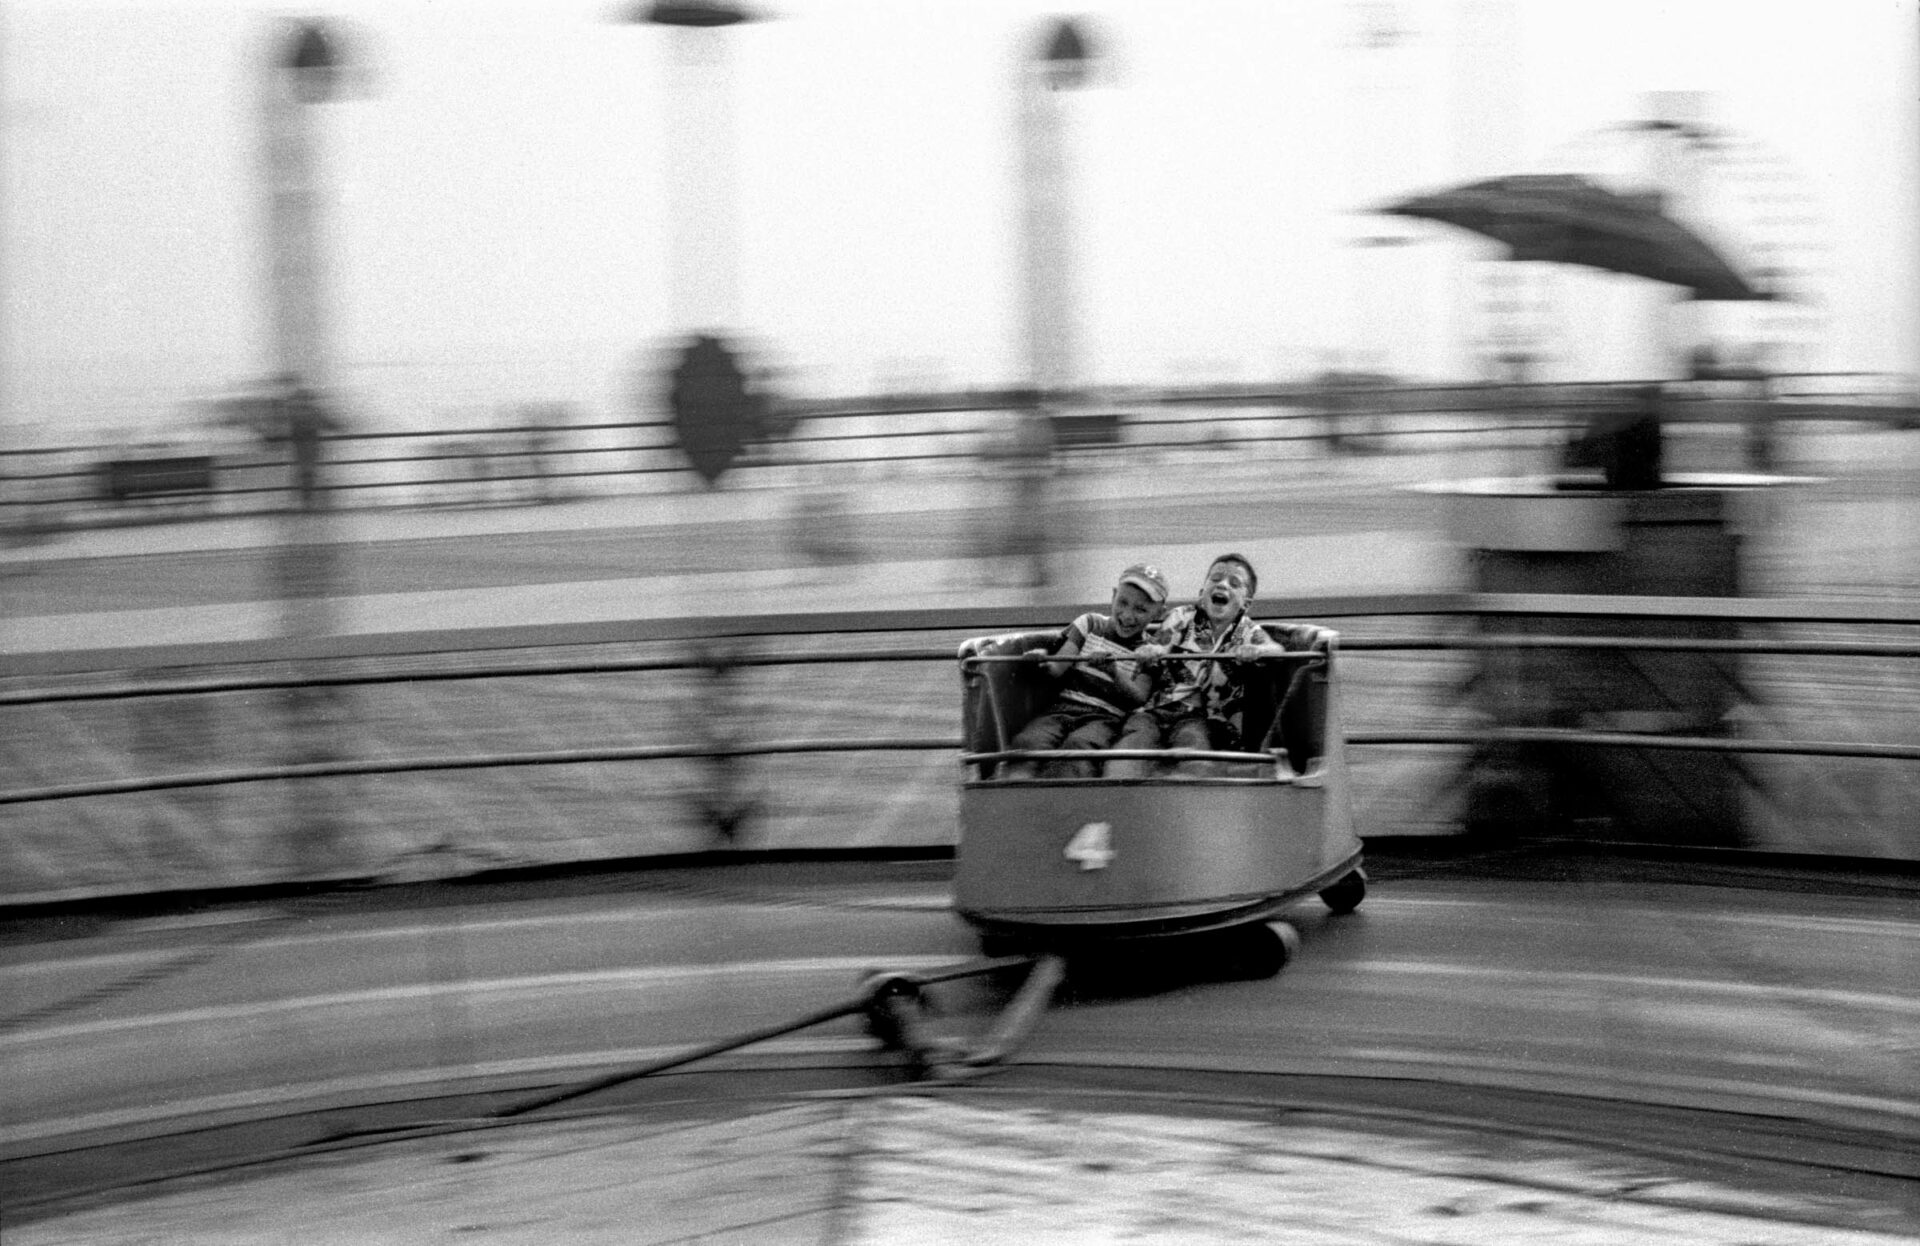 Two little boys are spinning very fast on The Whip, a fun ride in Coney Island in 1950.